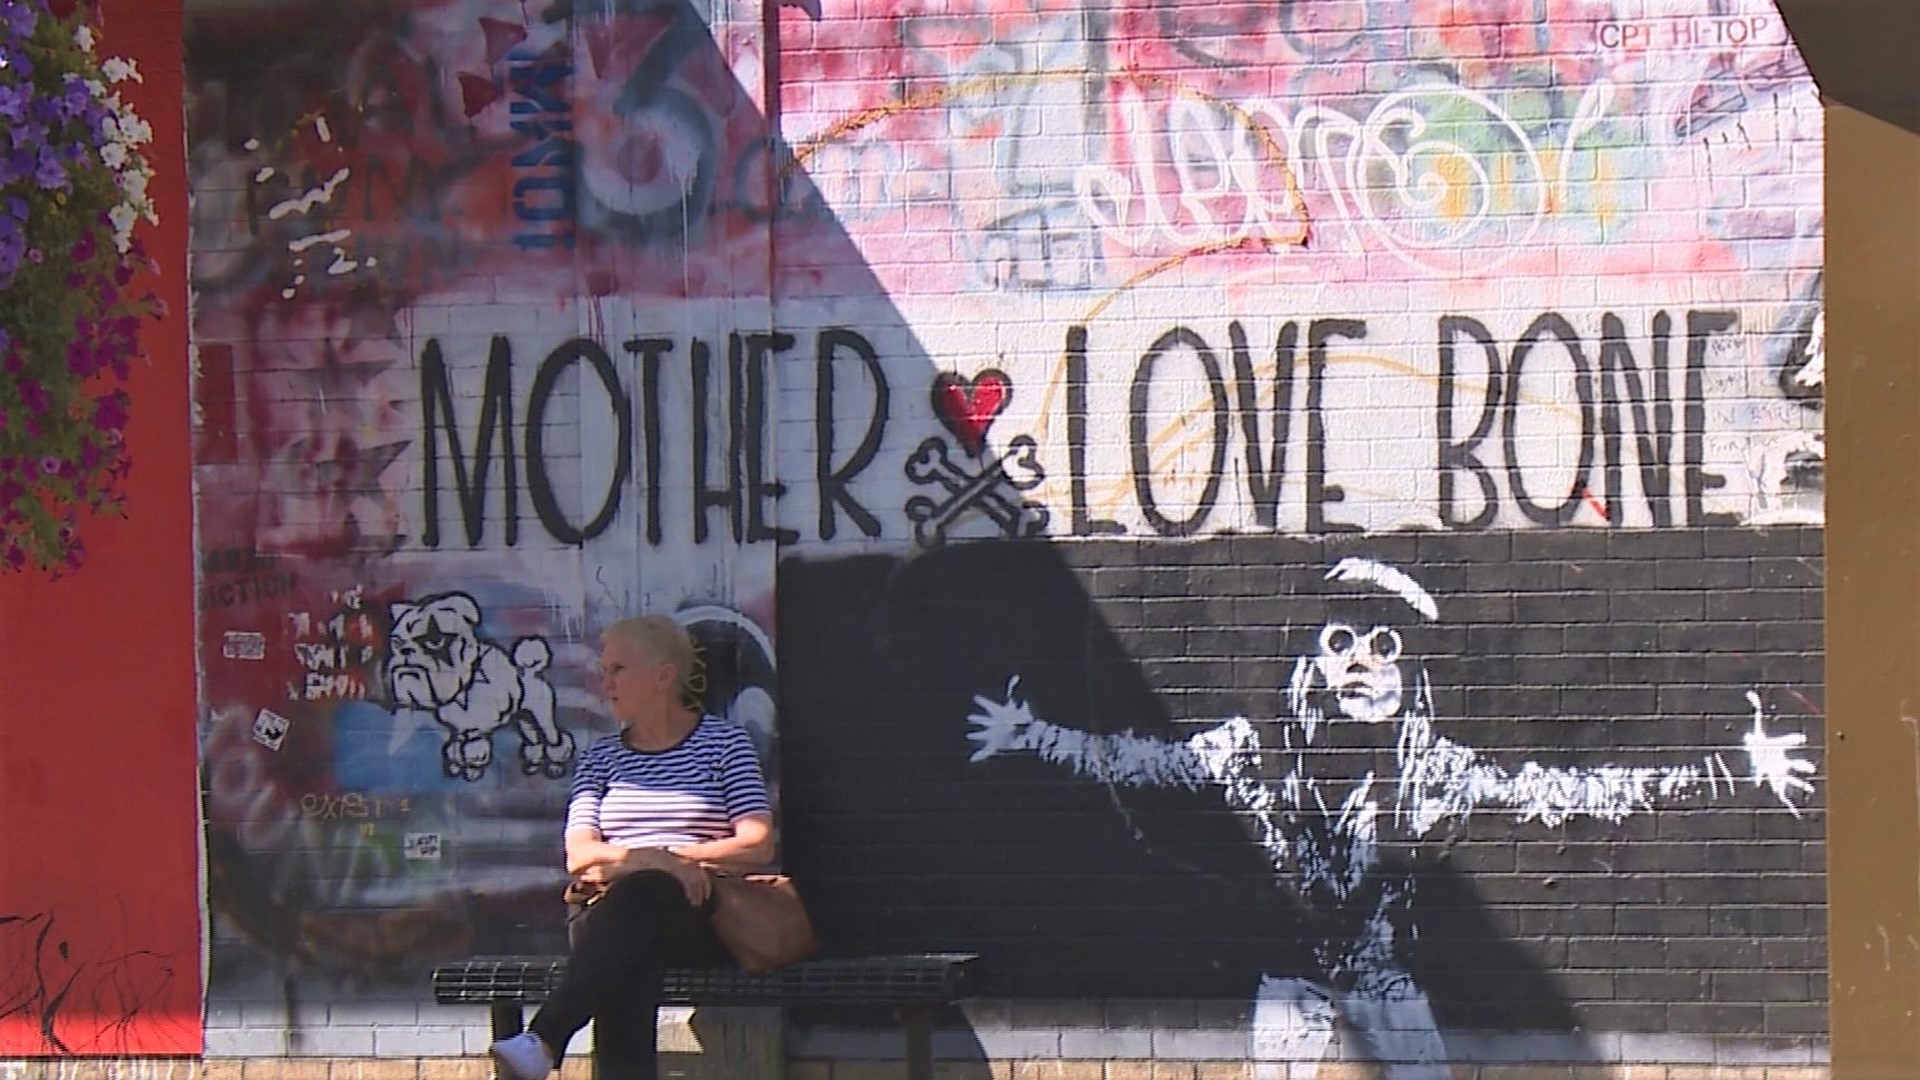 The "Mother Love Bone" mural on the walls of Easy Street Records was painted by Pearl Jam's Jeff Ament